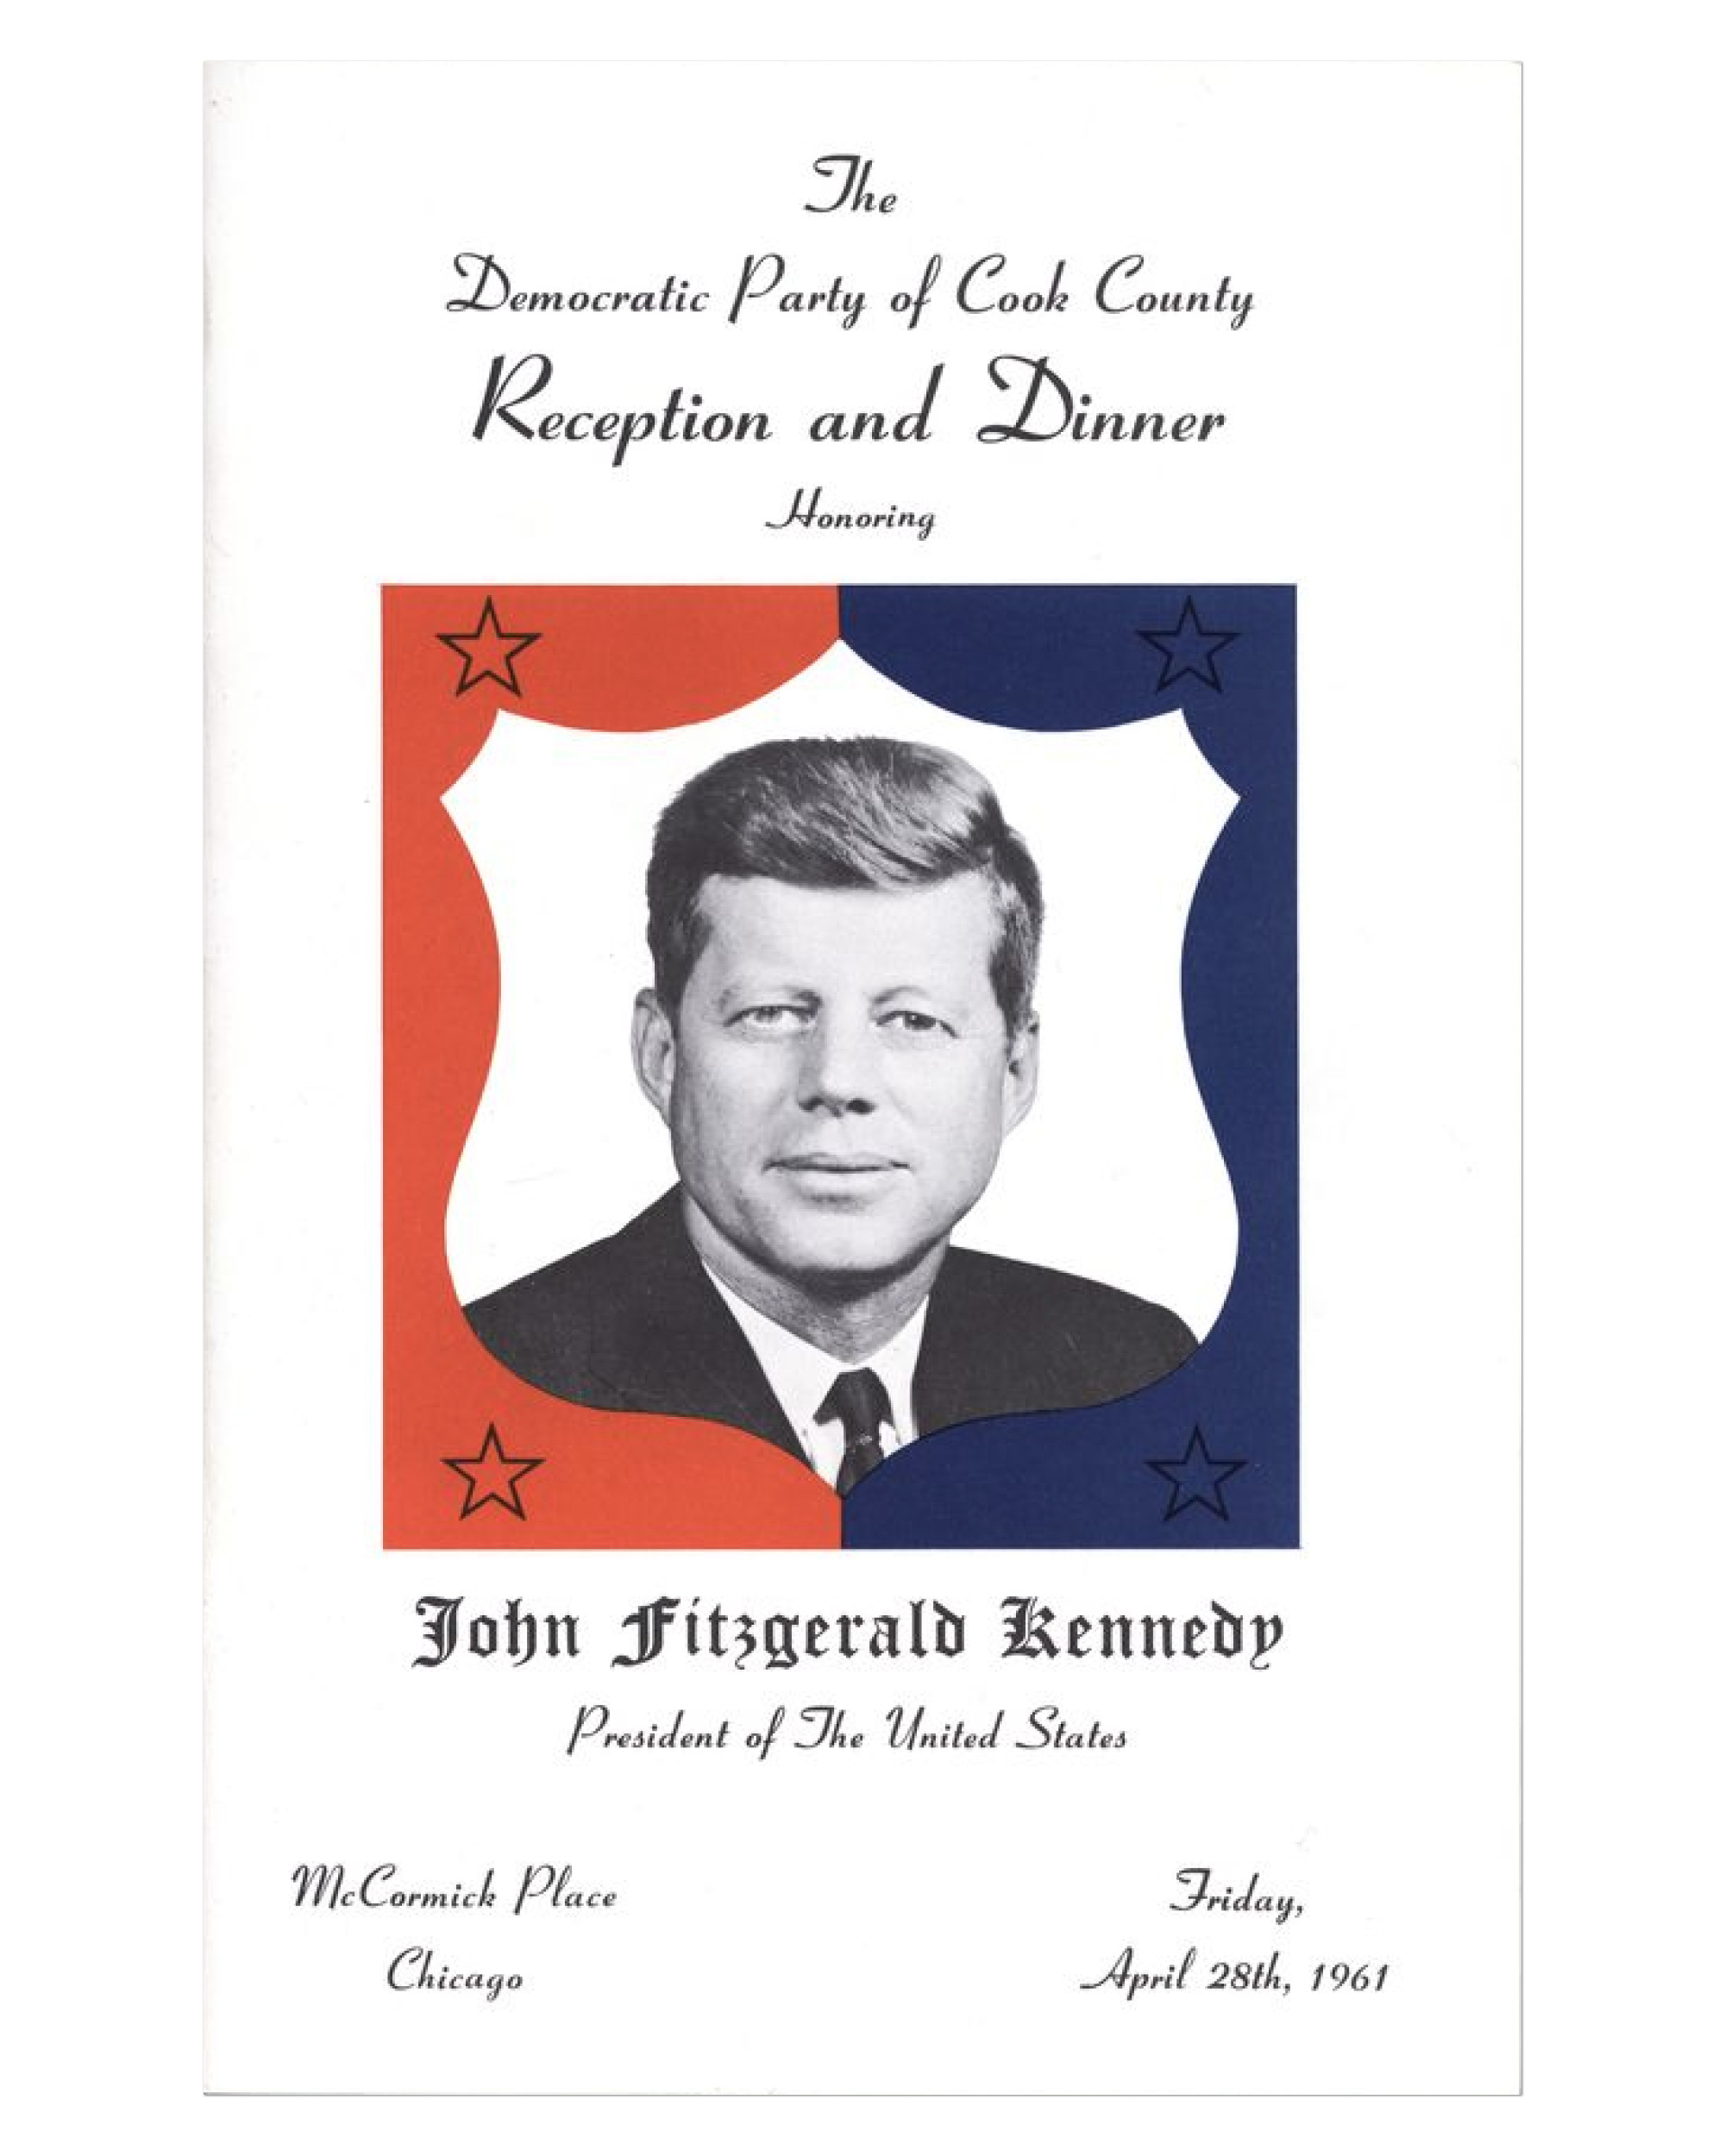 An invite to the the Cook County Democratic Party reception, where Abraham first met John F. Kennedy.